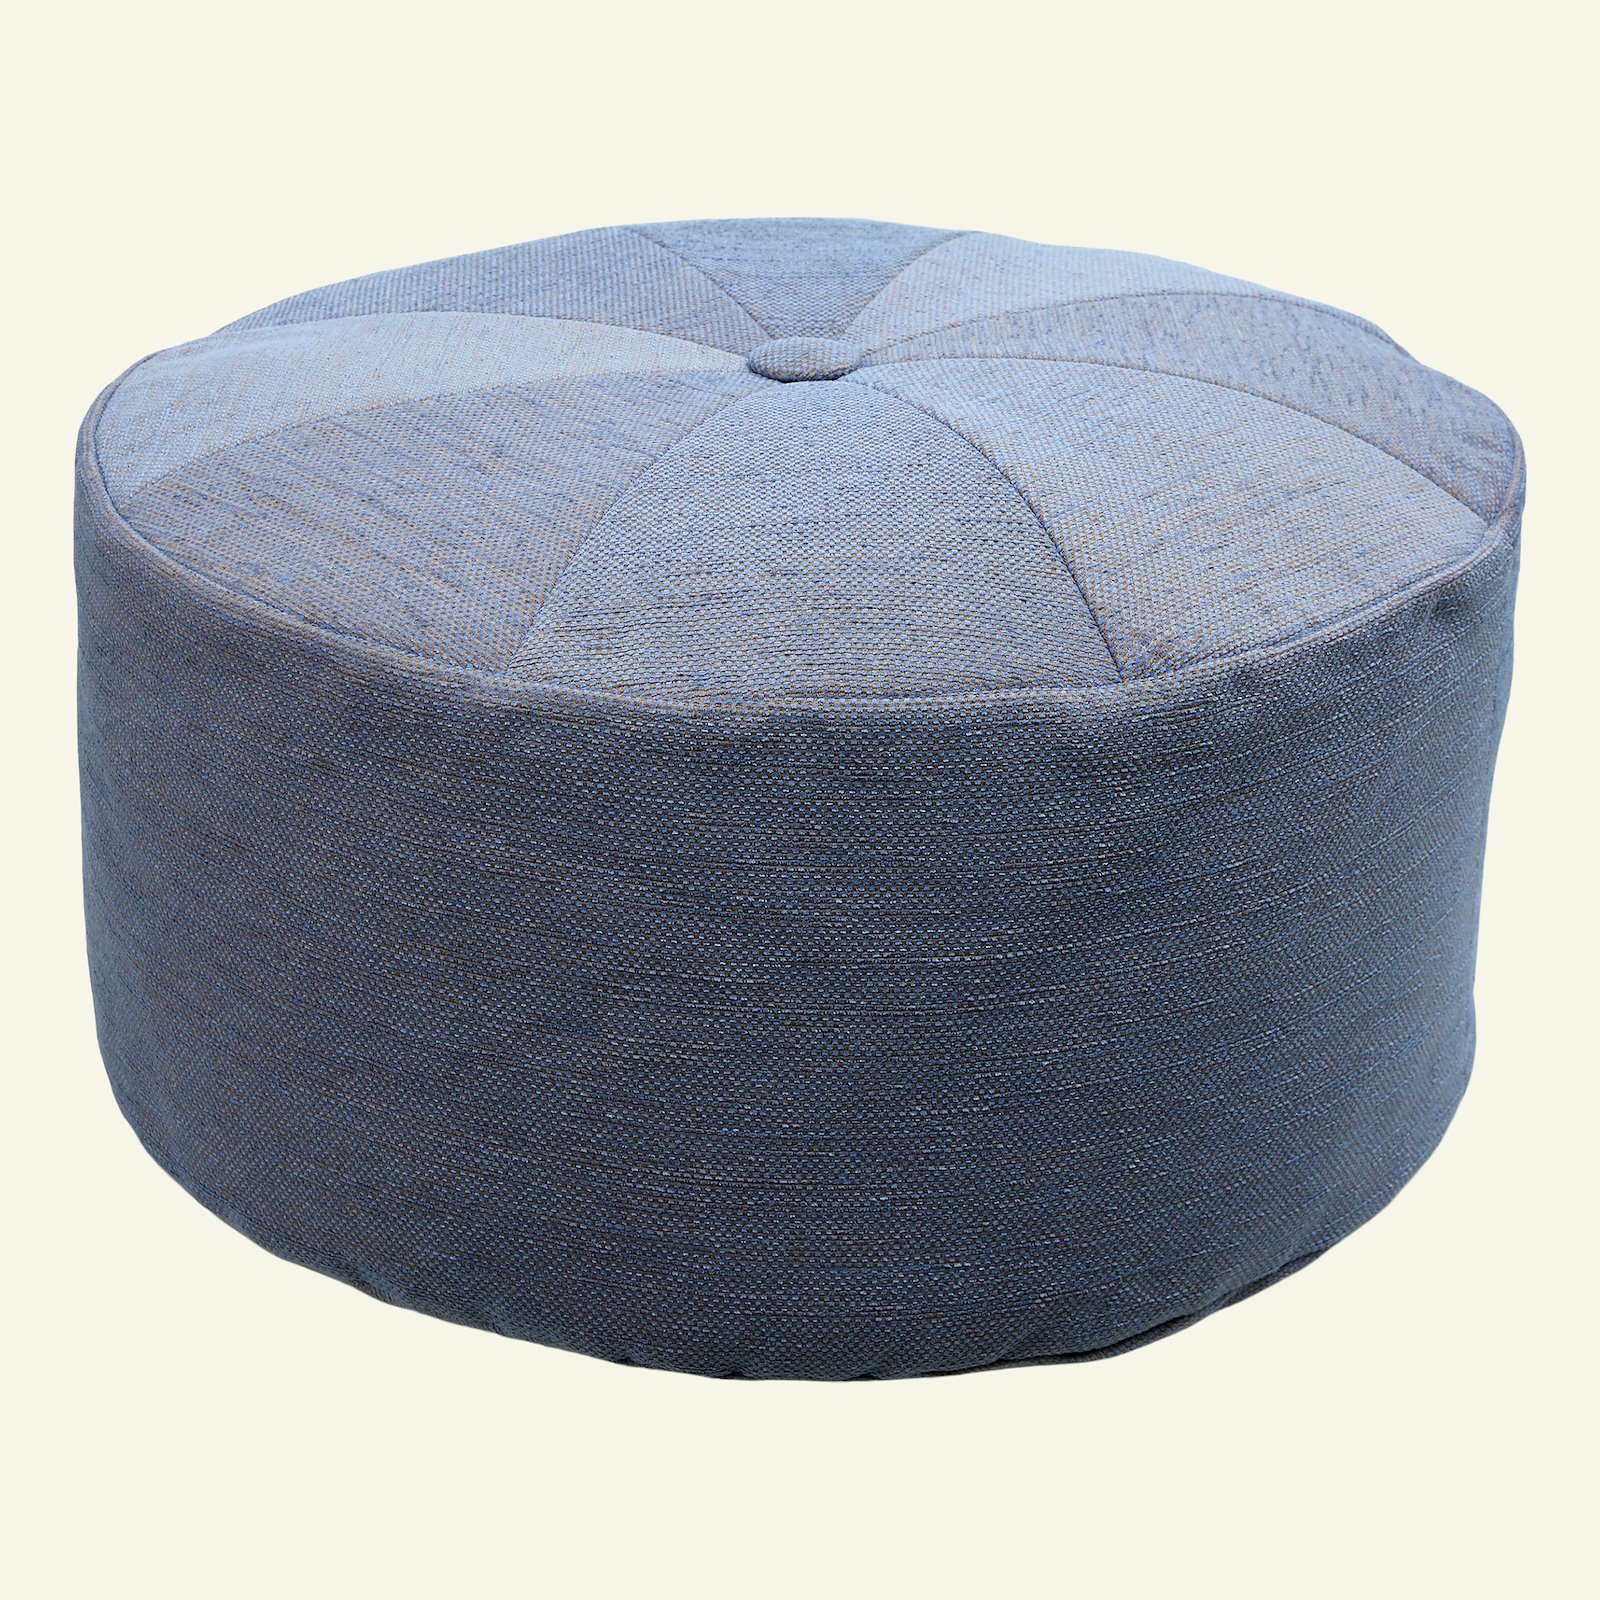 Upholstery chenille structure blue p90286_824048_43509_sskit